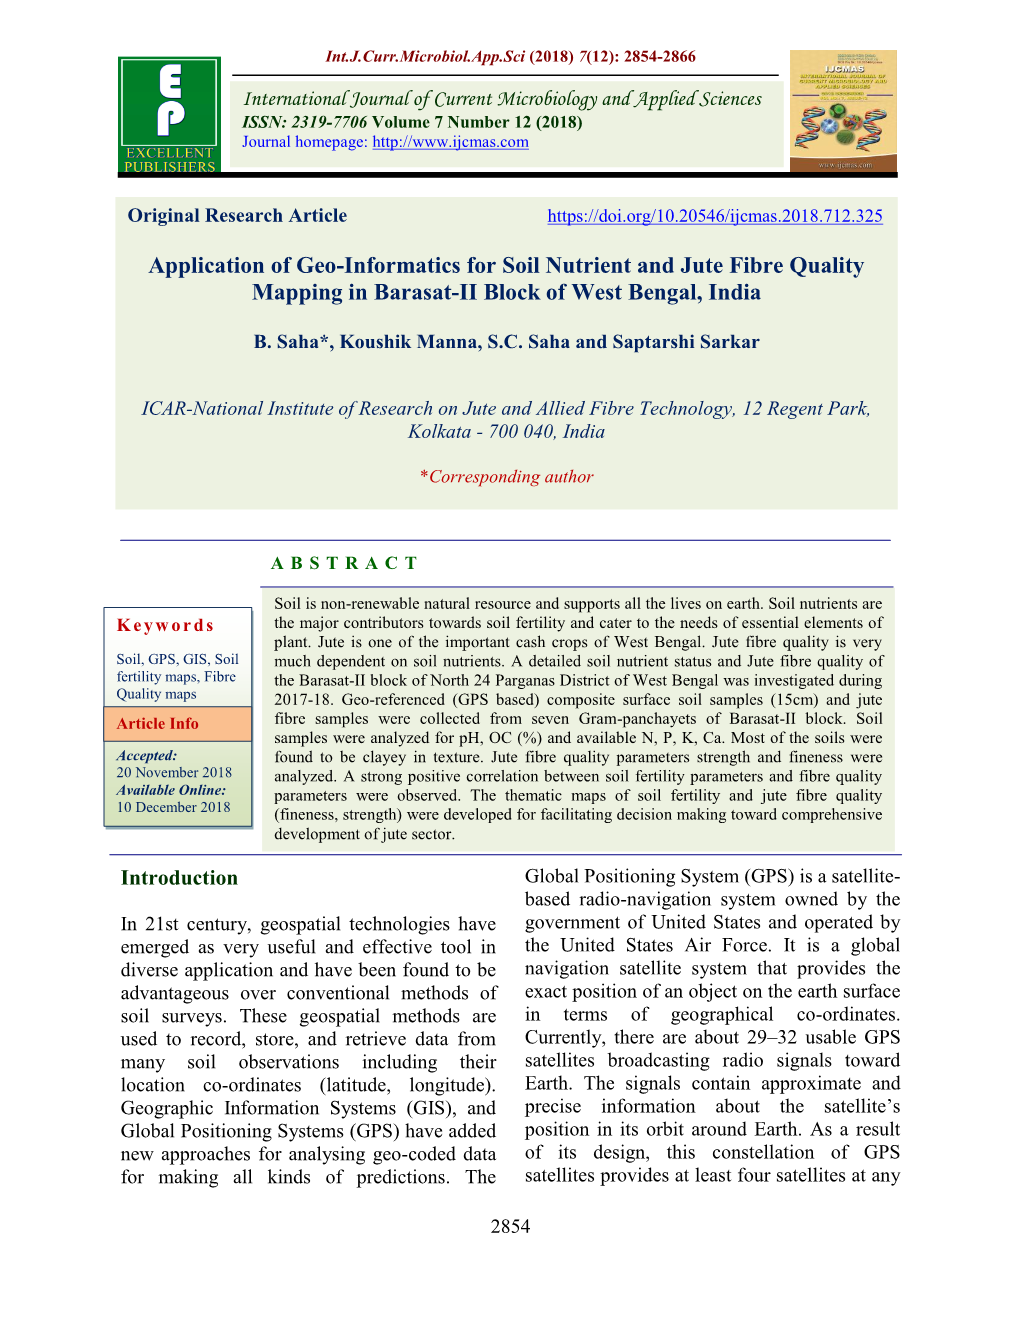 Application of Geo-Informatics for Soil Nutrient and Jute Fibre Quality Mapping in Barasat-II Block of West Bengal, India